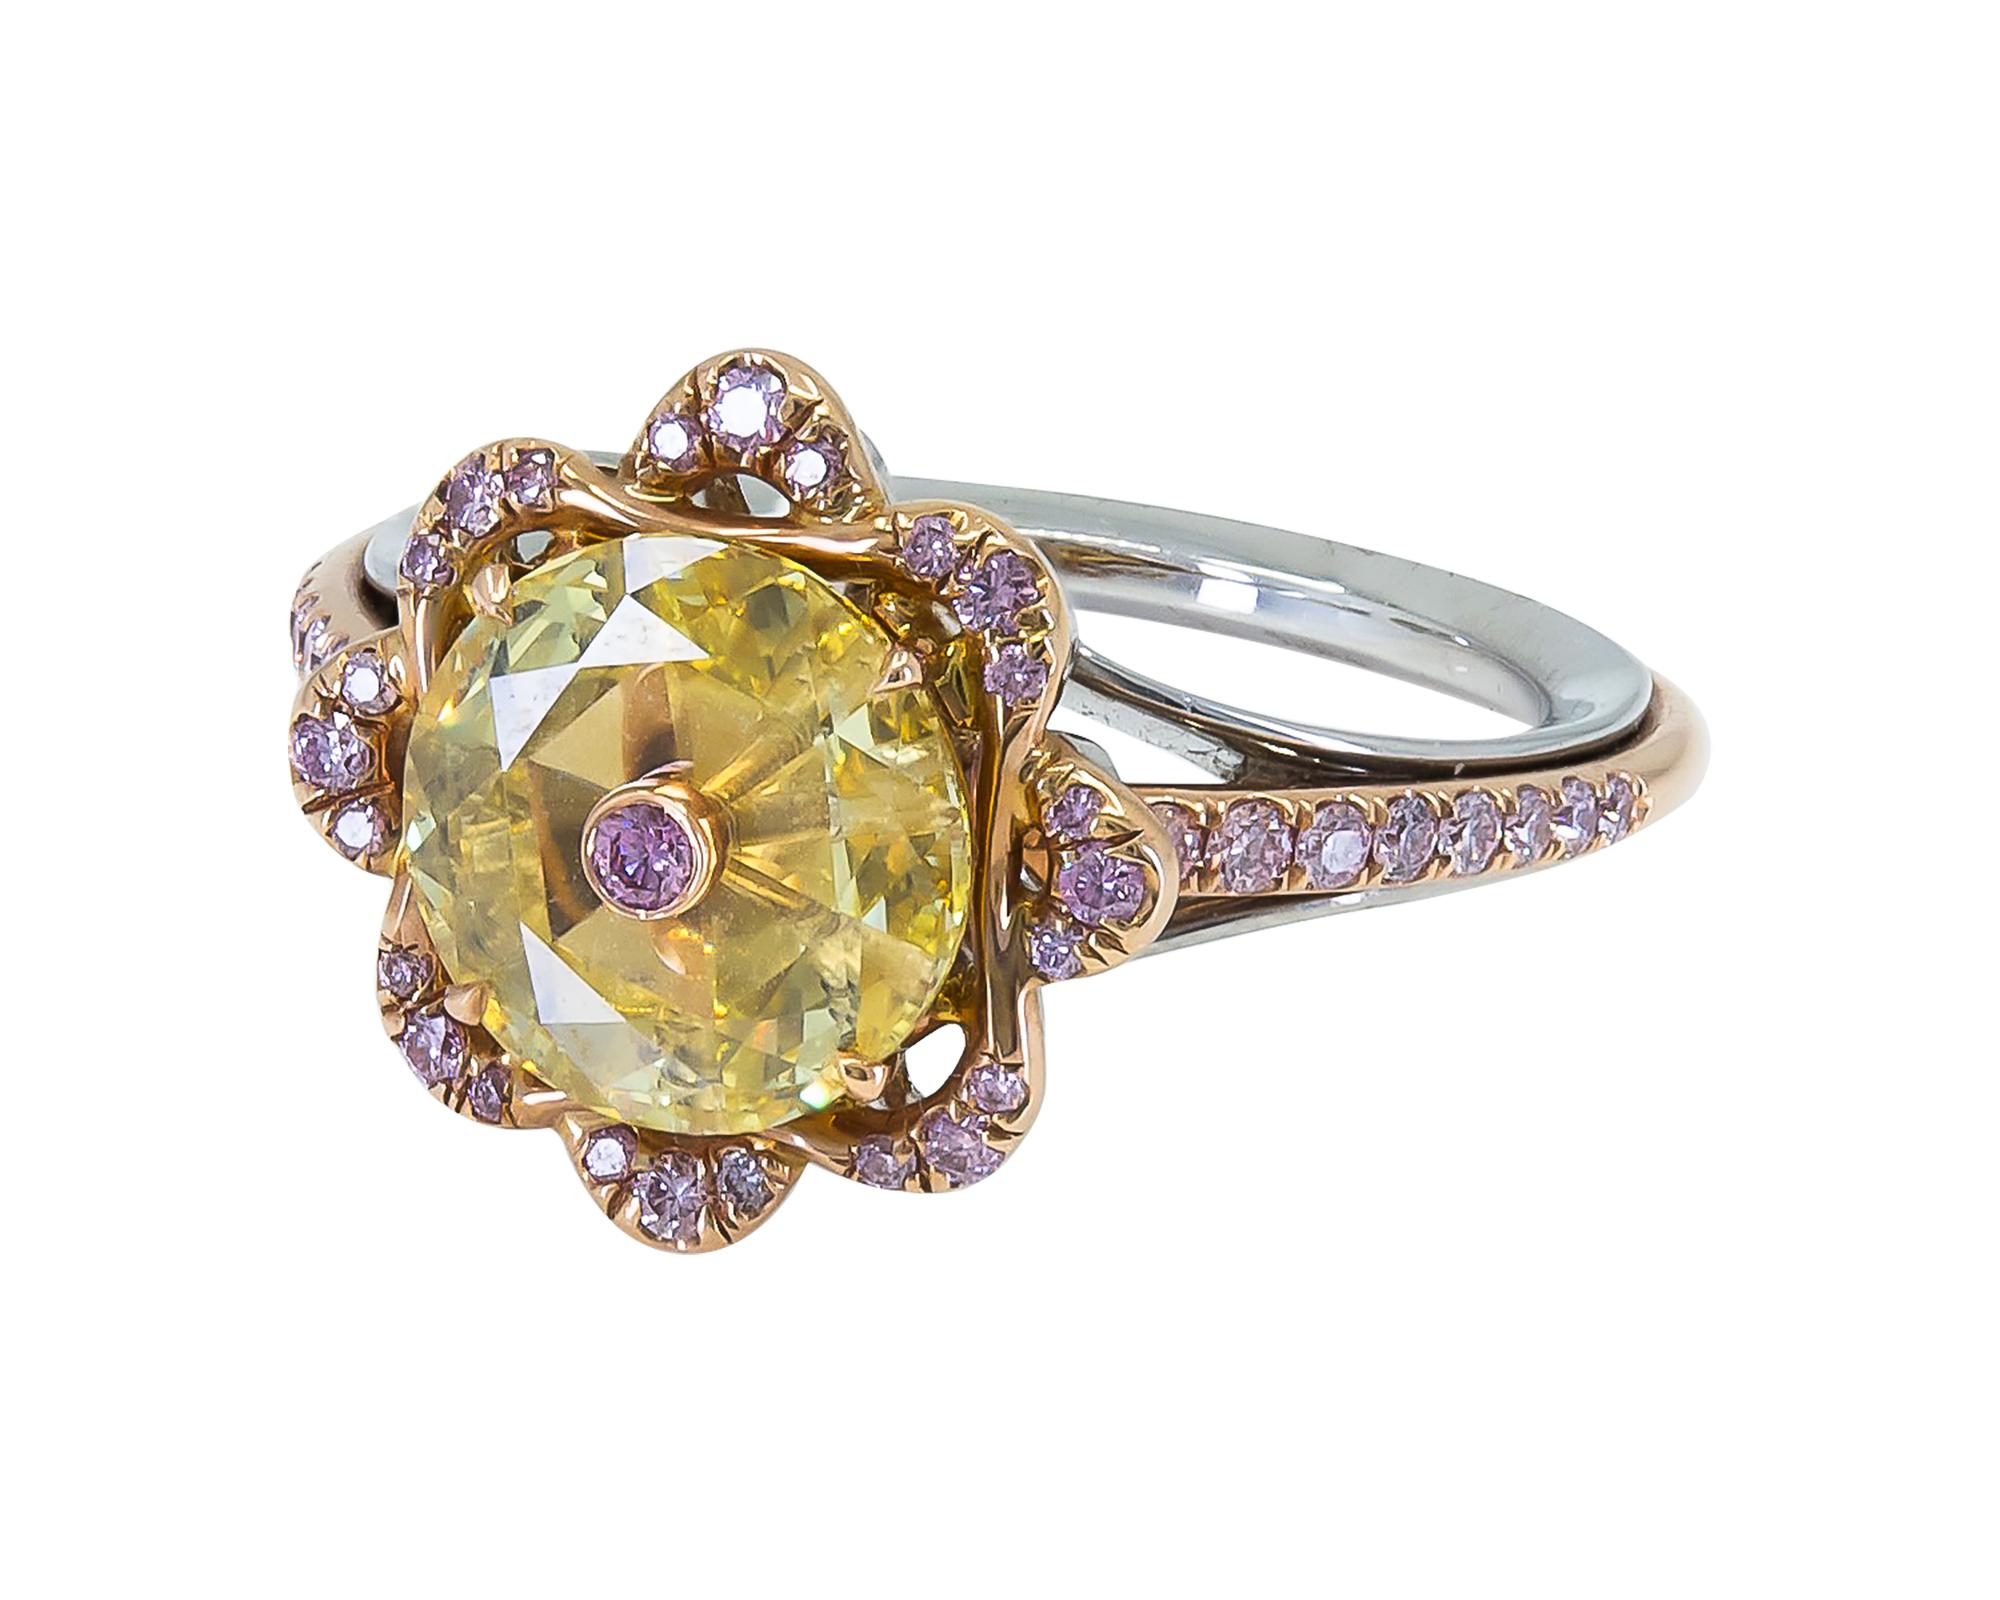 A beautiful and unique cocktail ring designed as a flower and comprising of a round fancy yellow diamond weighing 1.31 carats. The clarity is VVS2. Certified by GIA.
The mounting is made in multi-tone gold and embellished with pink pave diamonds.